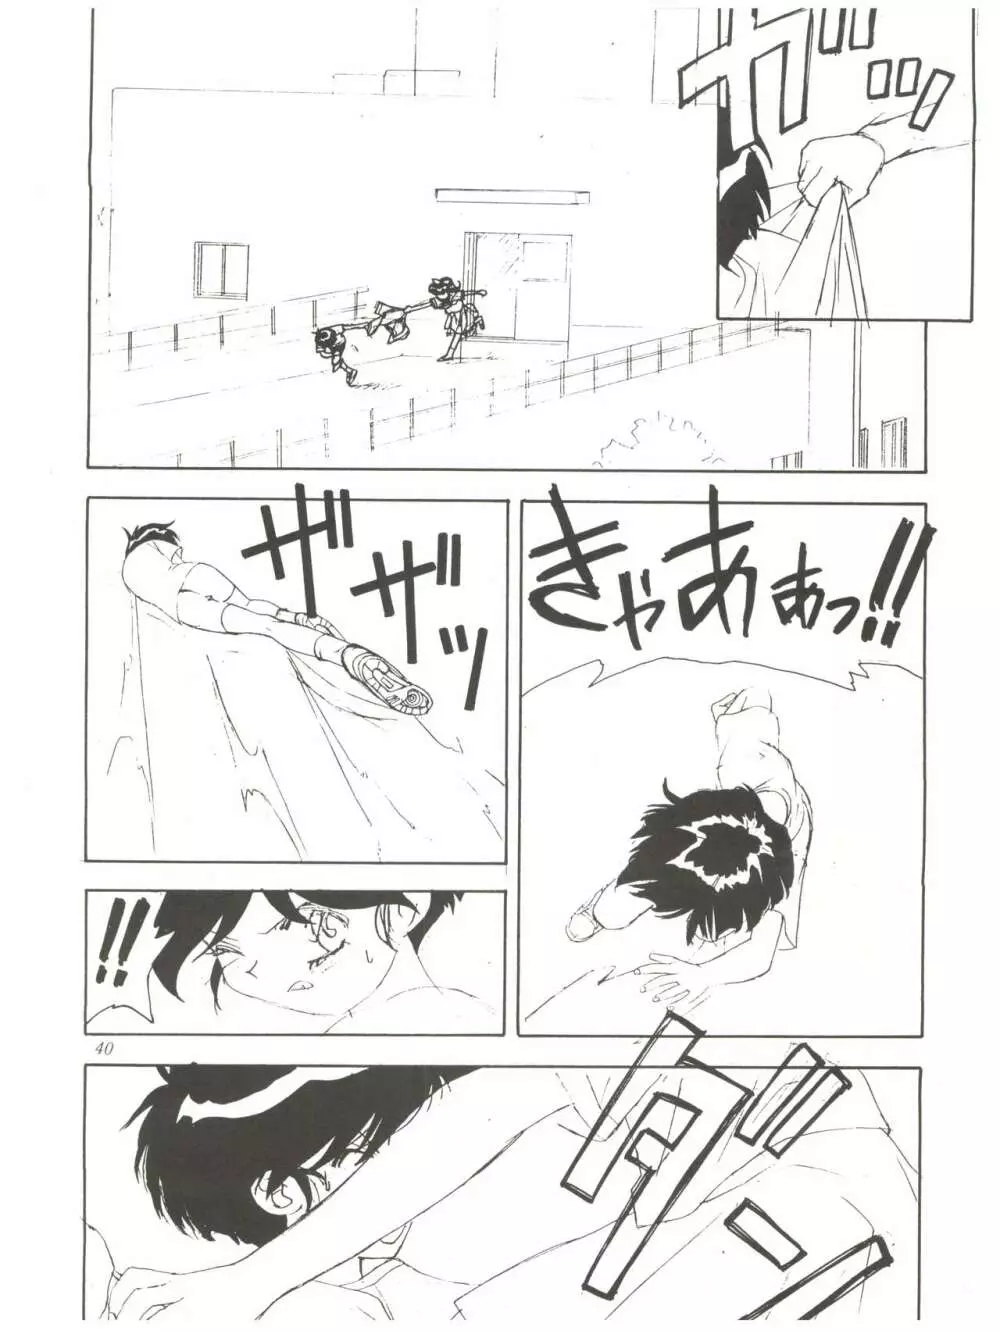 FLY! ISAMI!! - page44